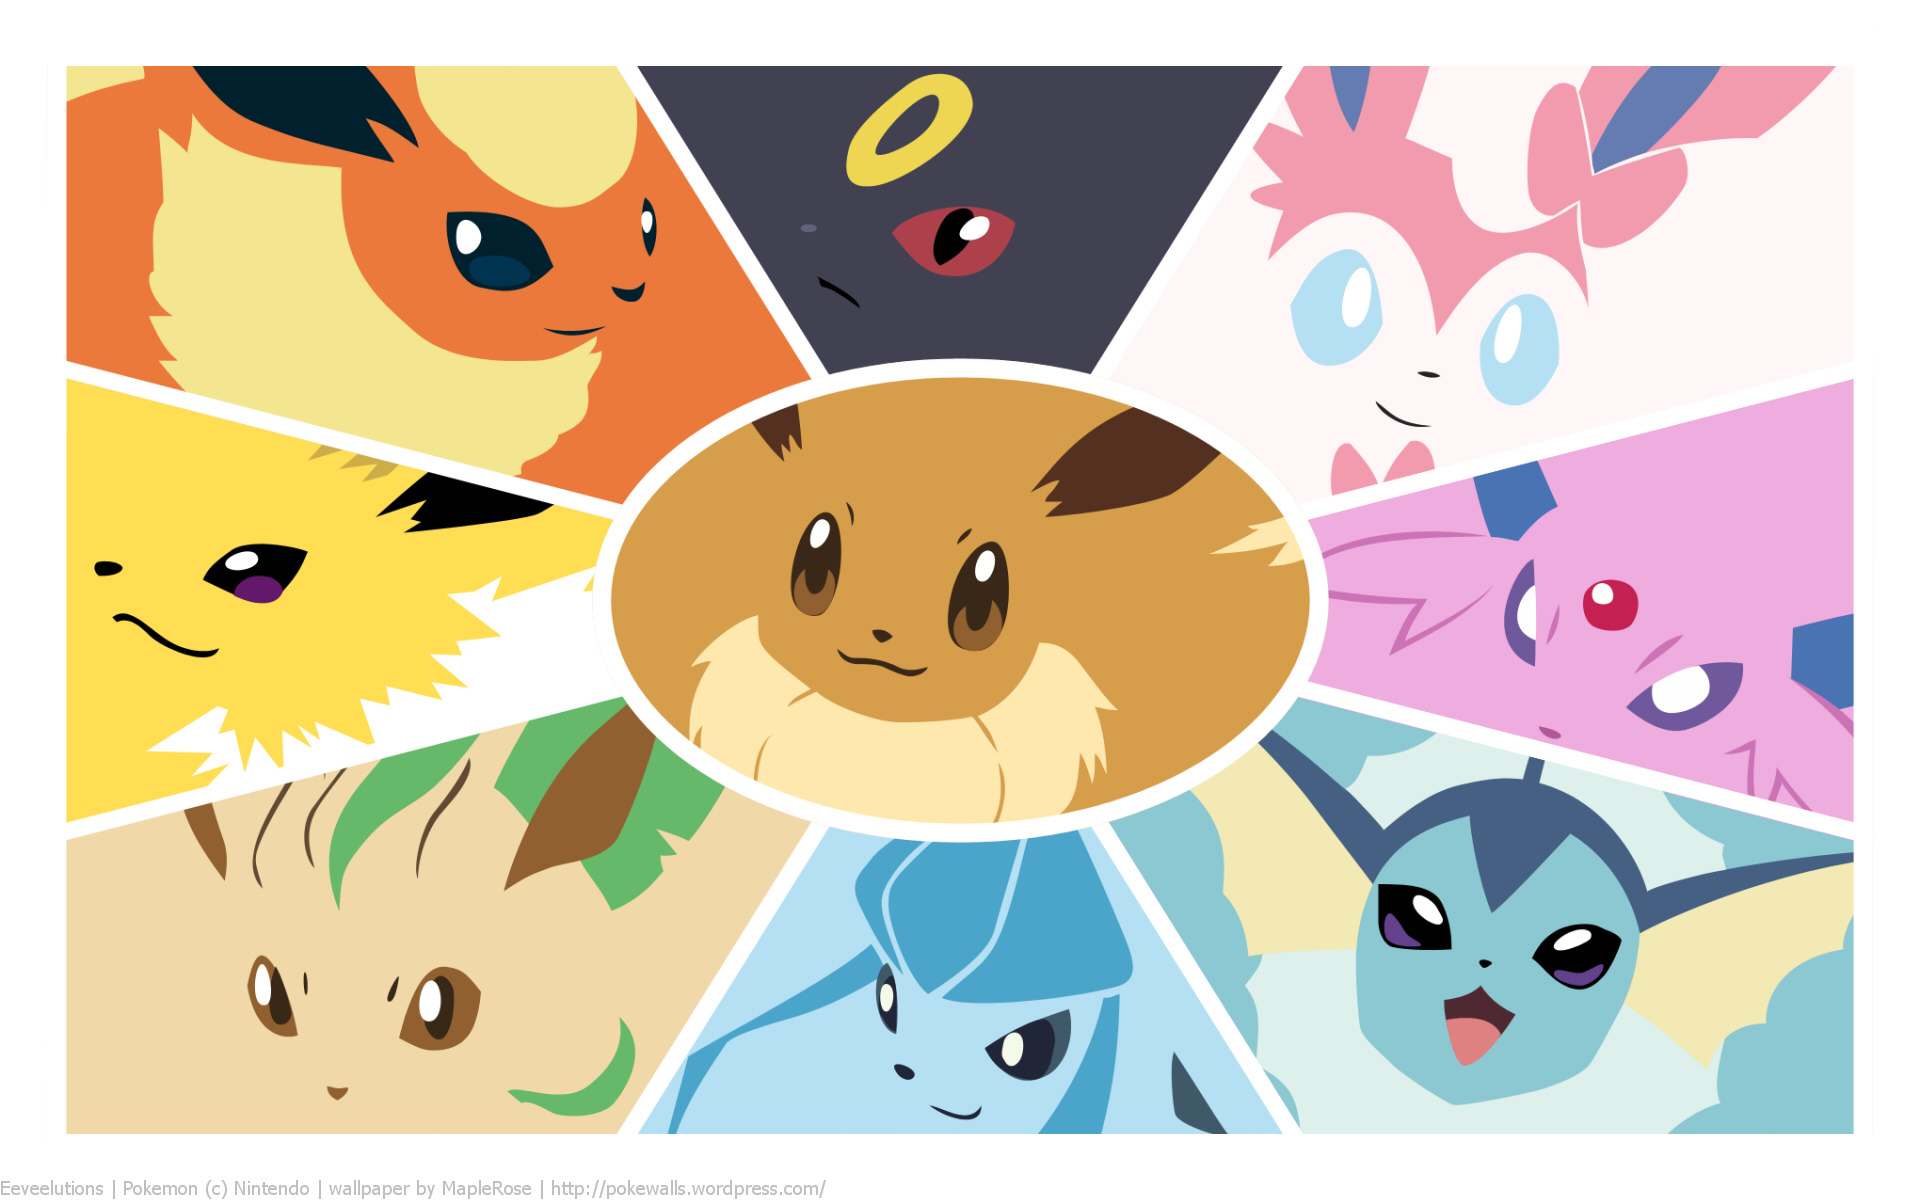 Week First Off Updated The Eeveelutions Wallpaper To Include Sylveon